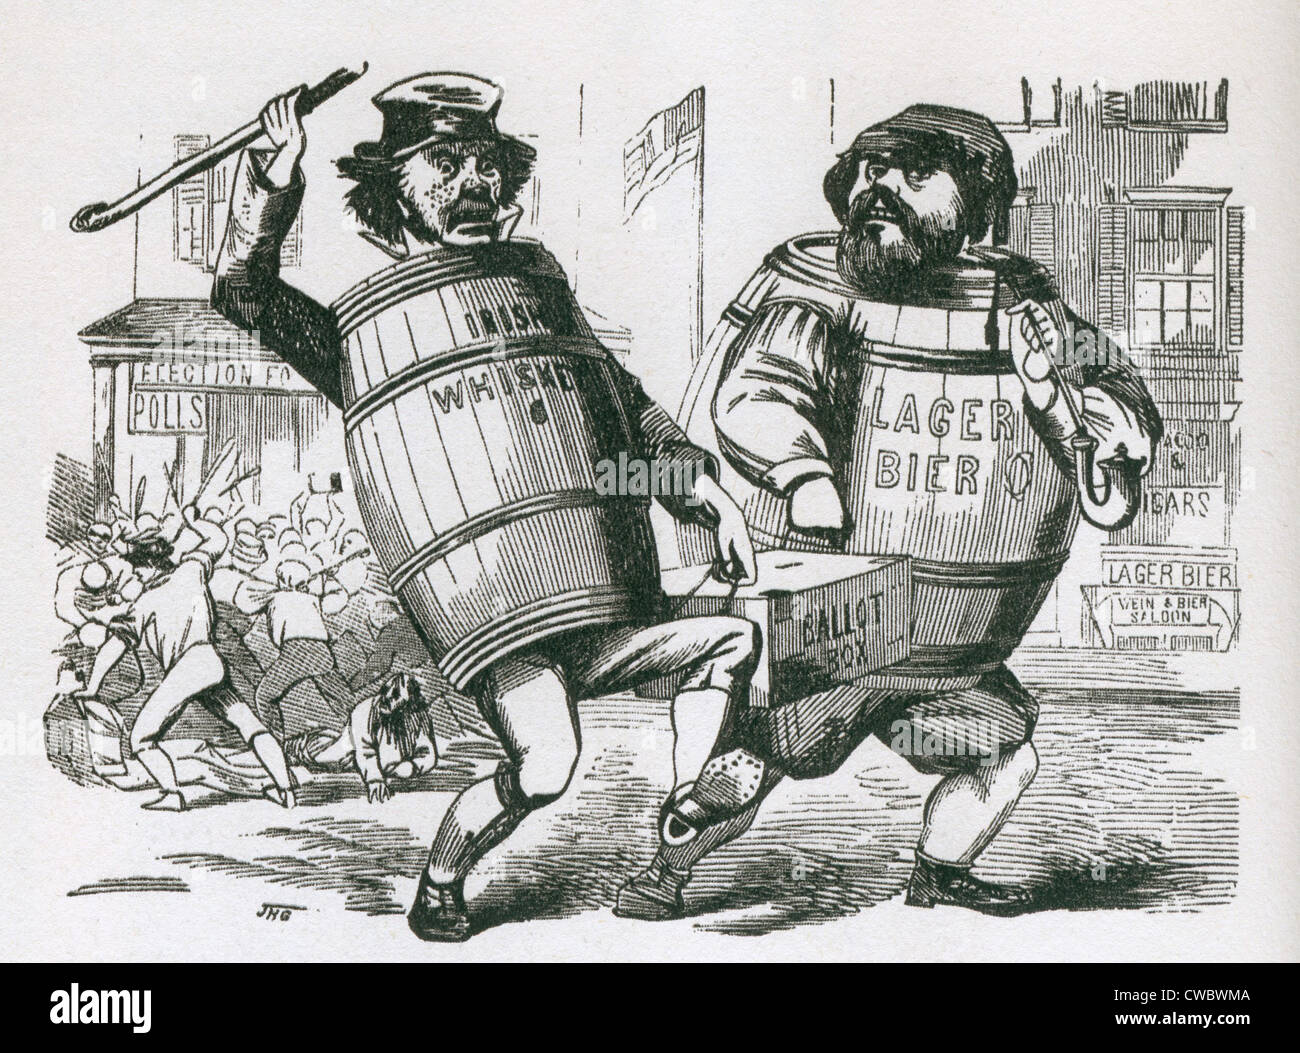 Anti-Immigrant cartoon showing two men with barrels as bodies, labeled 'Irish Wiskey' and 'Lager Bier', carrying a ballot box. Stock Photo